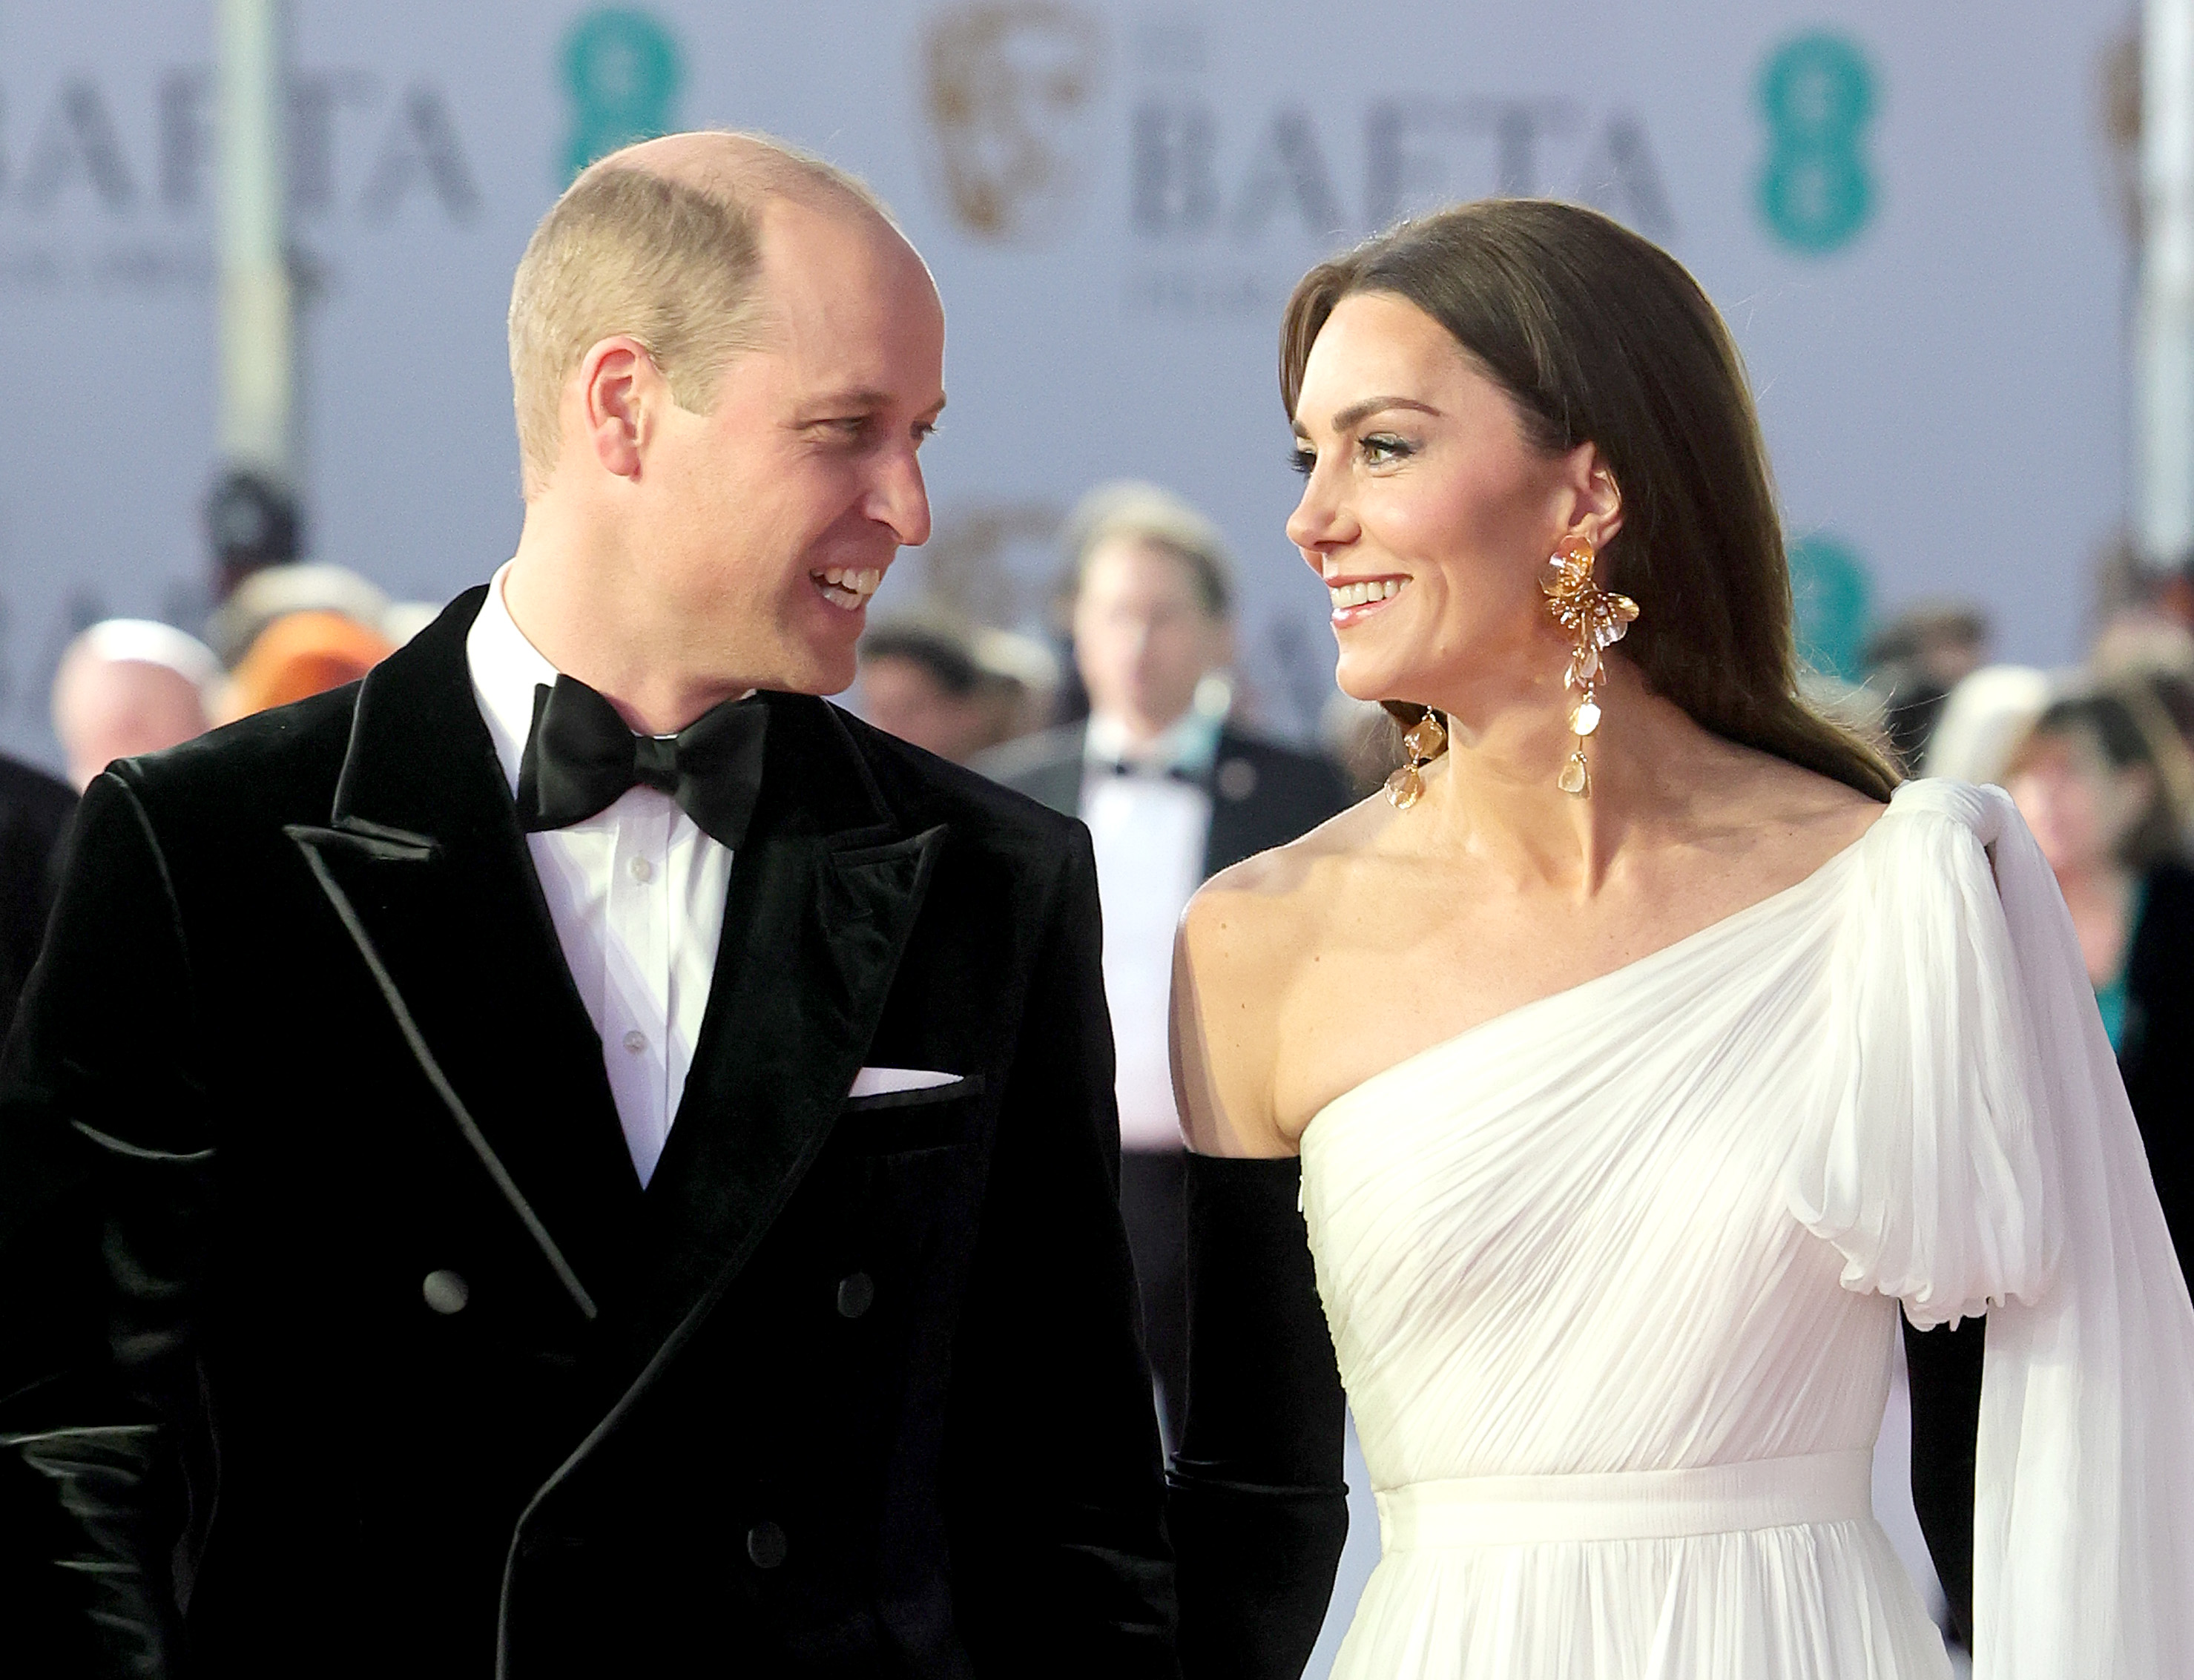 Prince William, Prince of Wales and Catherine, Princess of Wales, attend the EE BAFTA Film Awards at The Royal Festival Hall in London, England, on February 19, 2023. | Source: Getty Images